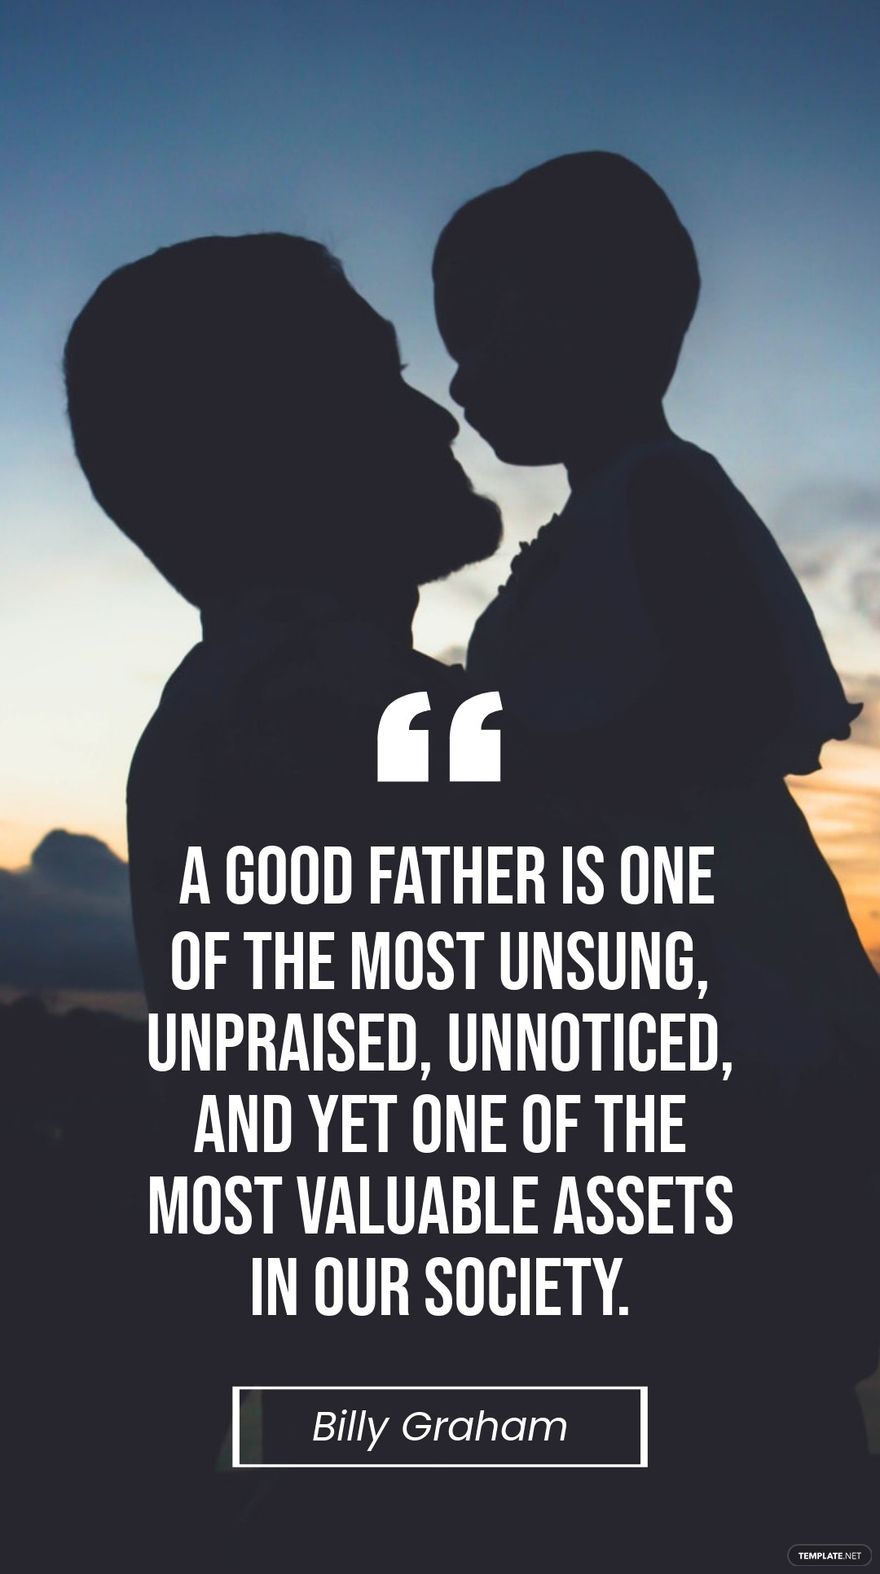 Free Billy Graham - A good father is one of the most unsung, unpraised, unnoticed, and yet one of the most valuable assets in our society.